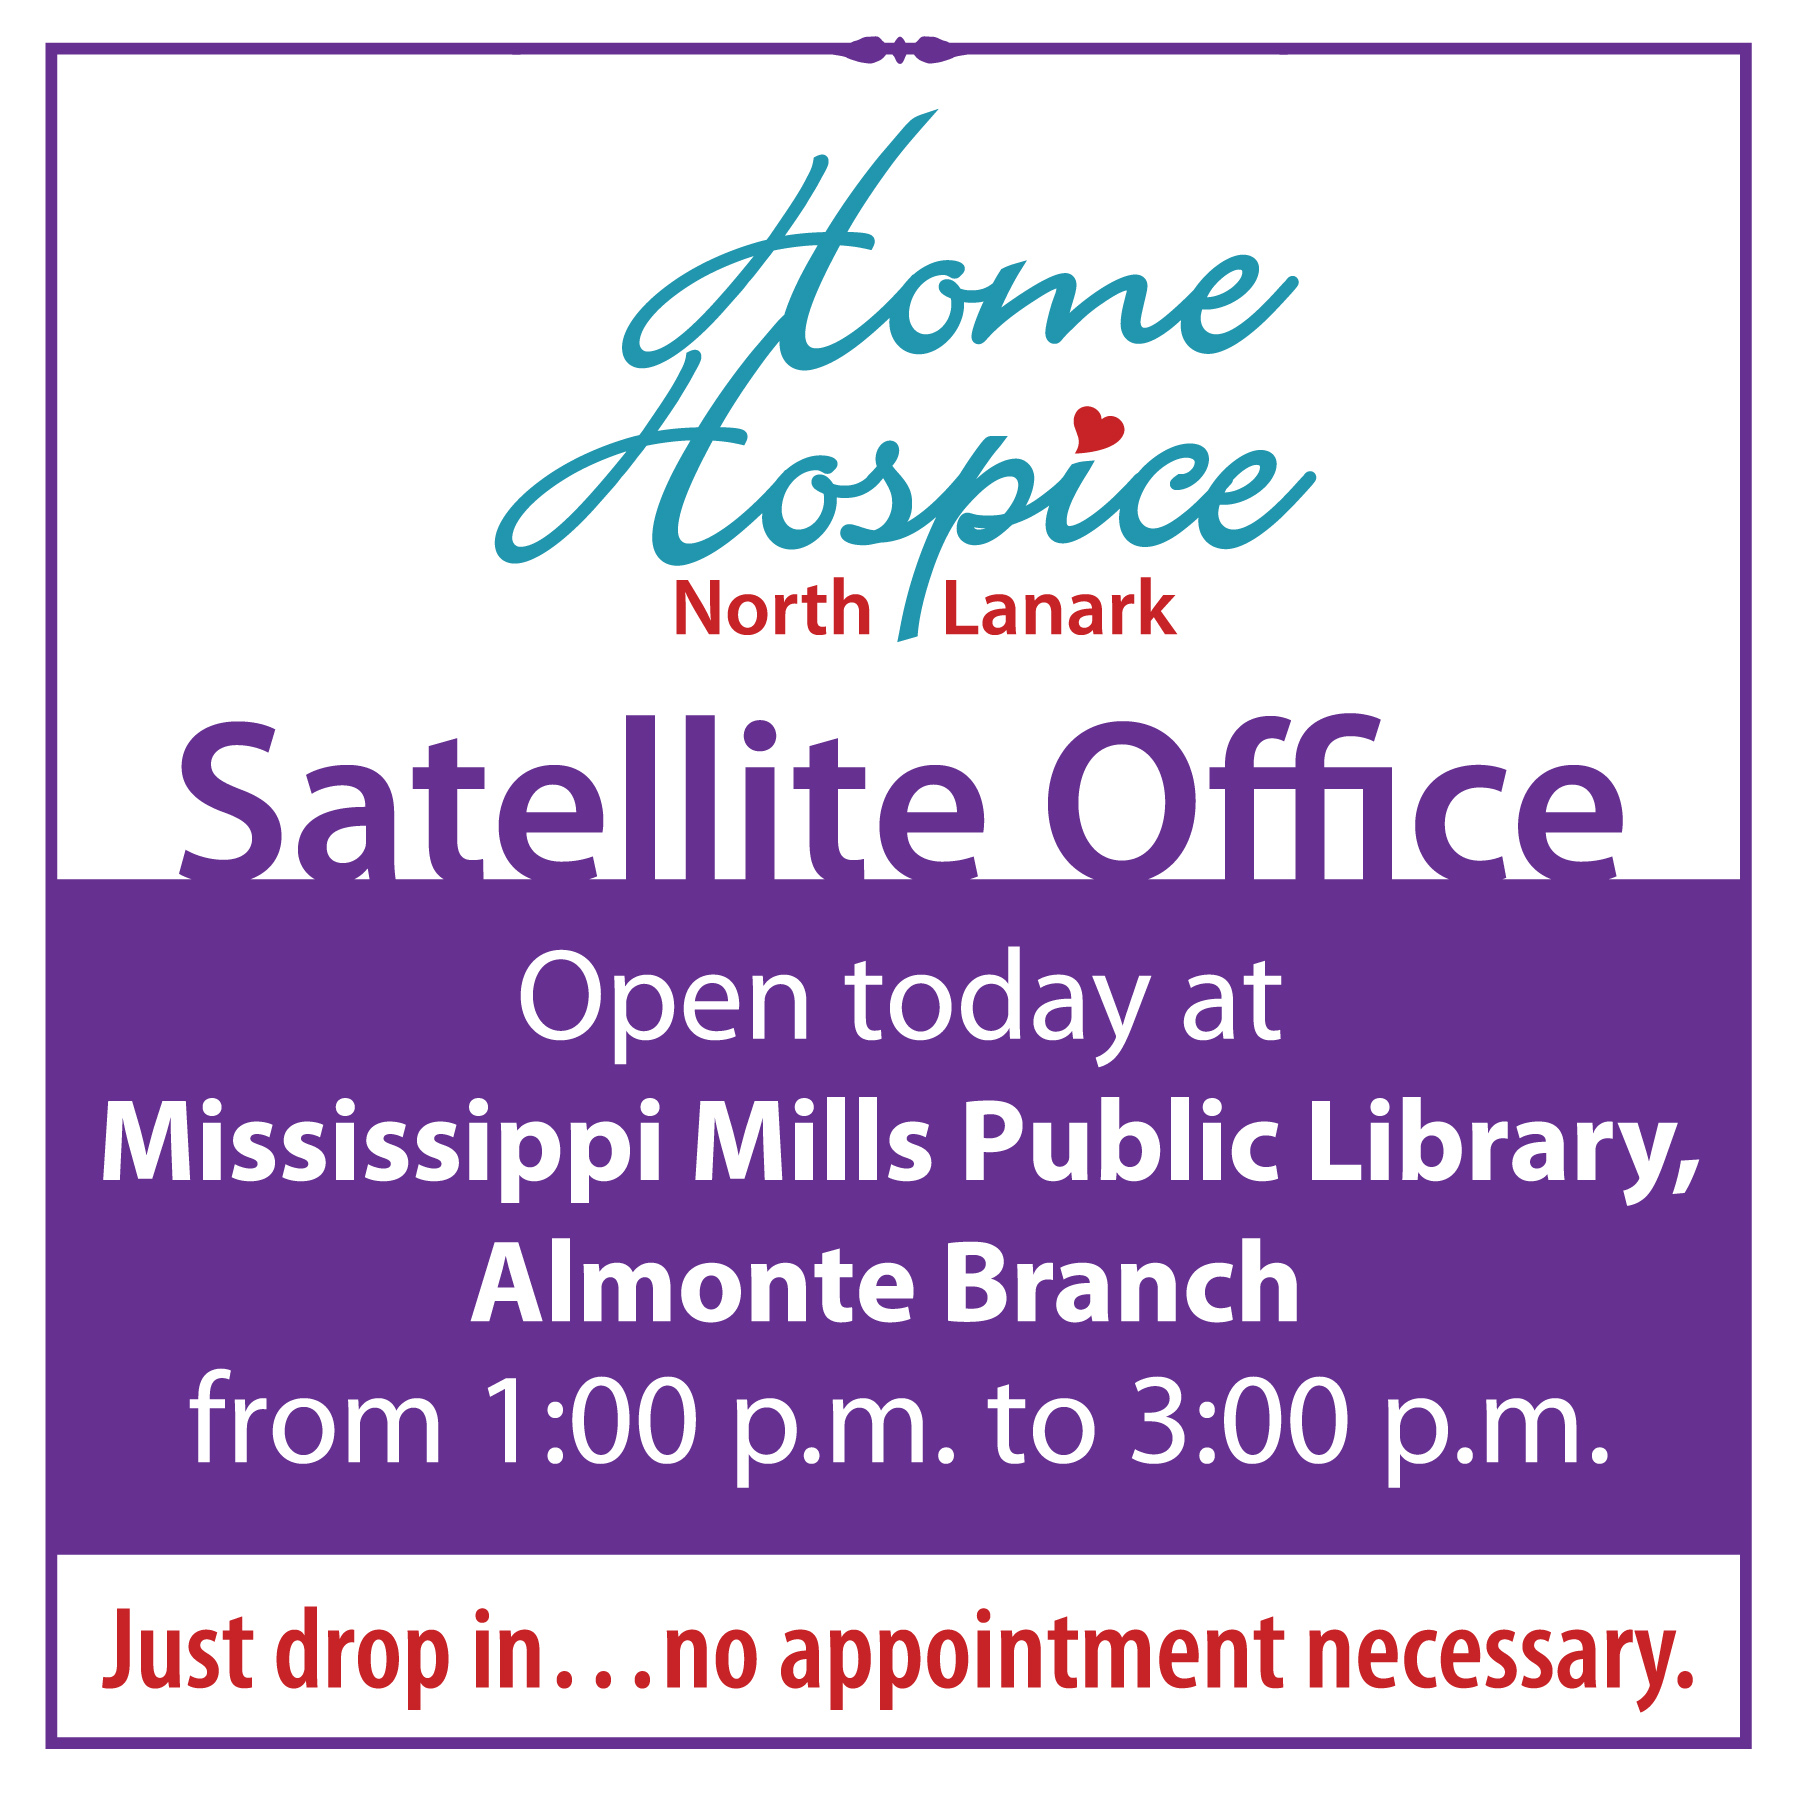 Oct. 27 - PD day fun, Almonte branch - Mississippi Mills Public Library